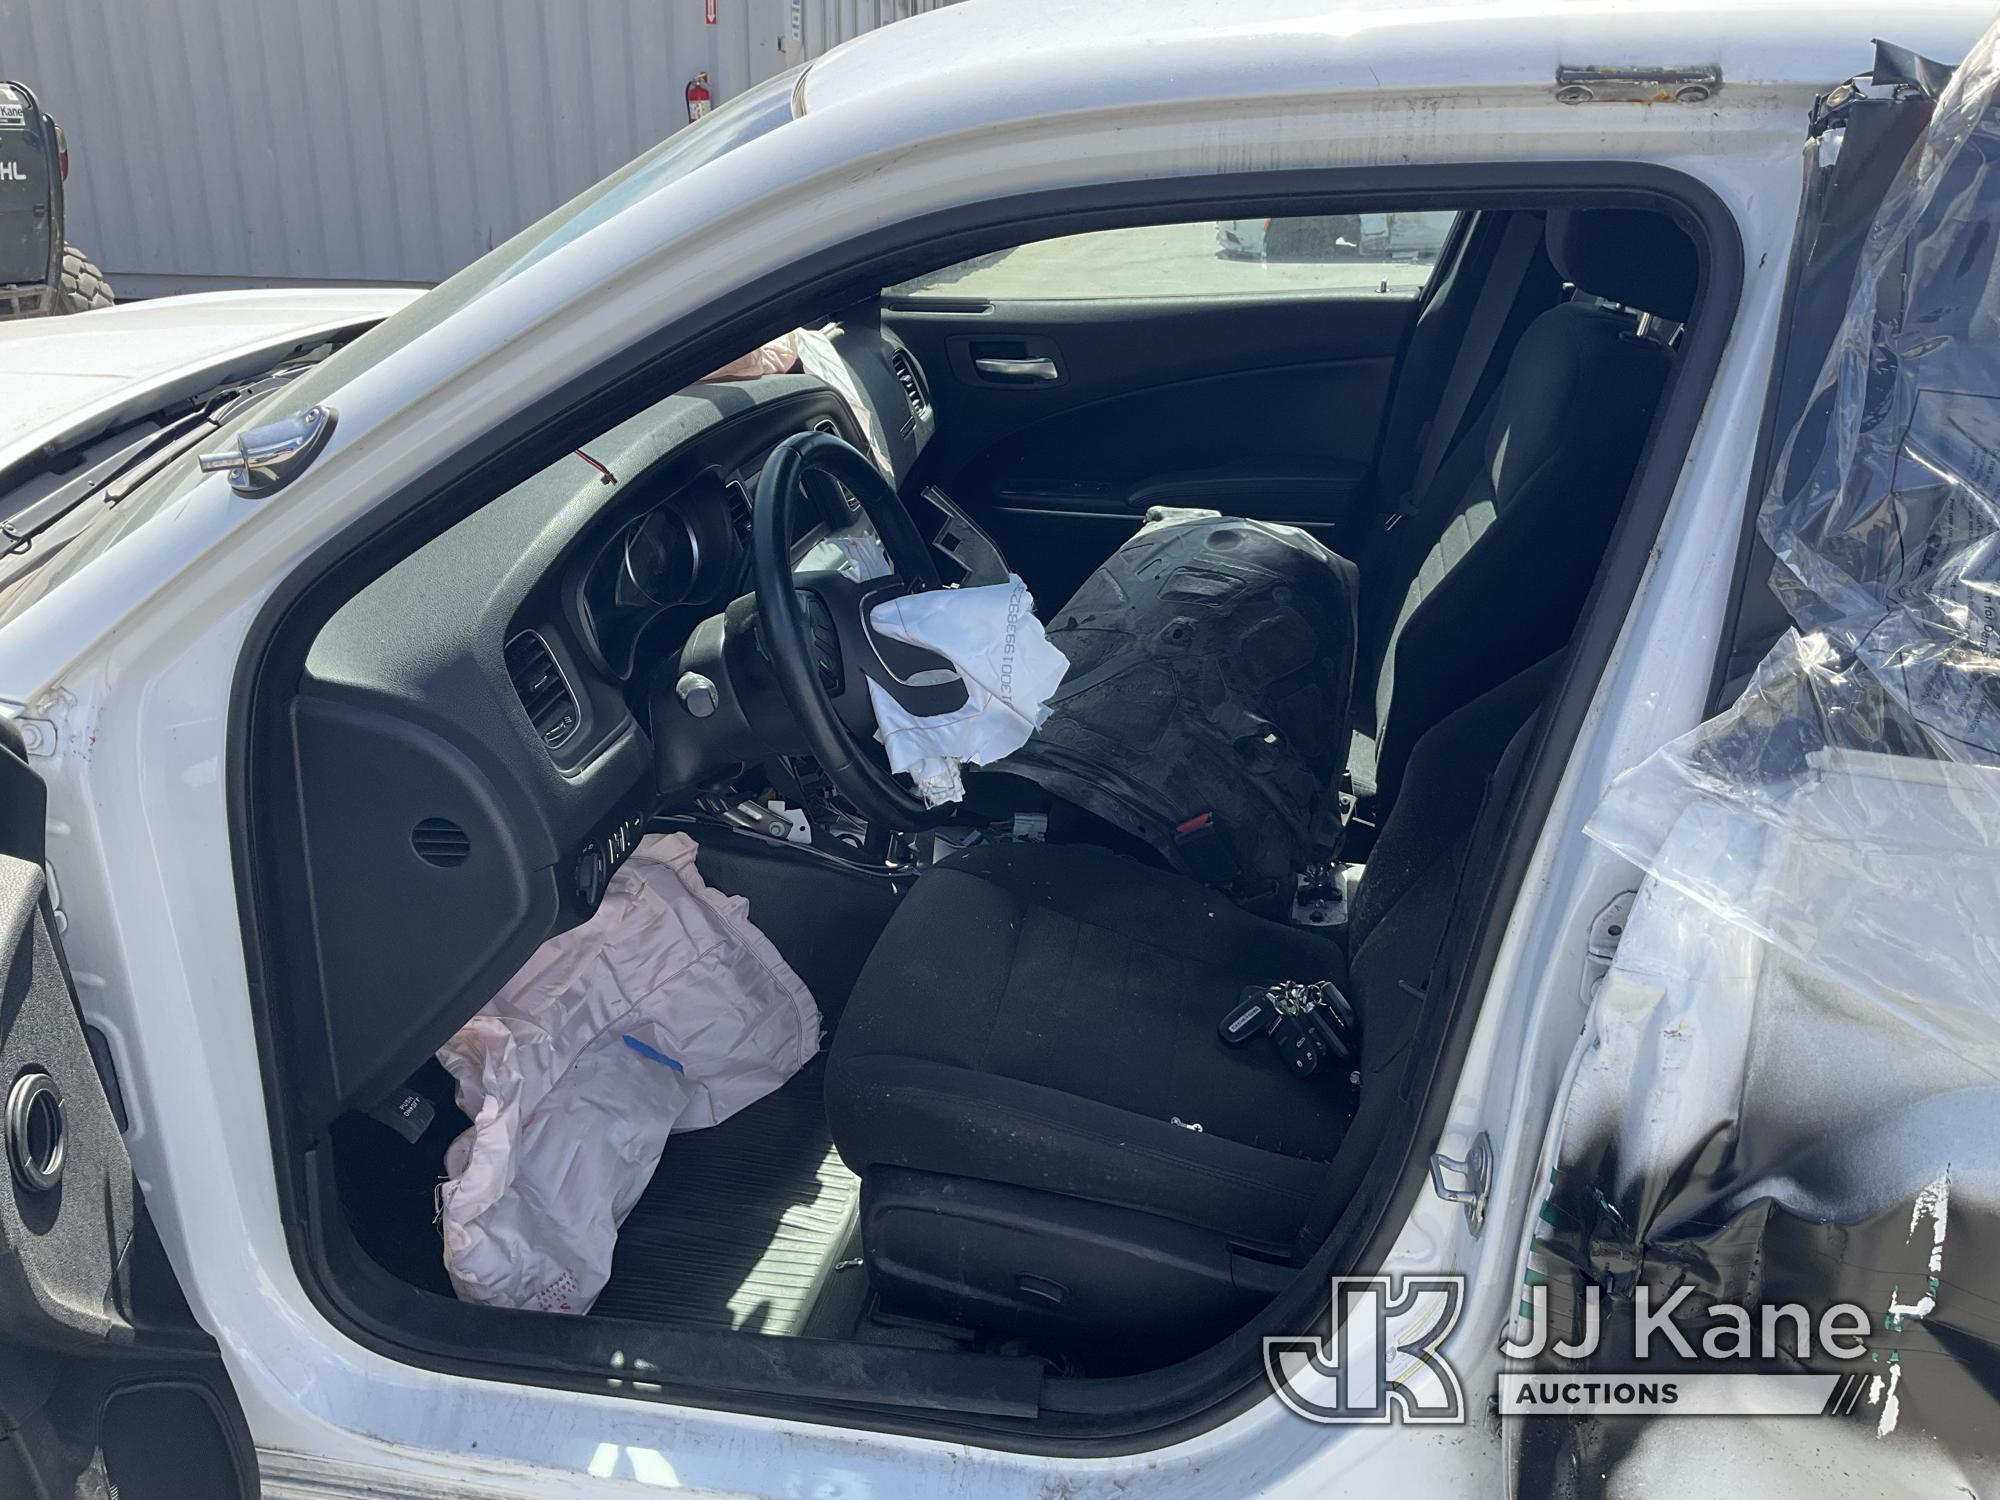 (Dixon, CA) 2019 Dodge Charger Police Package 4-Door Sedan Not Running. Wrecked) (Airbags deployed